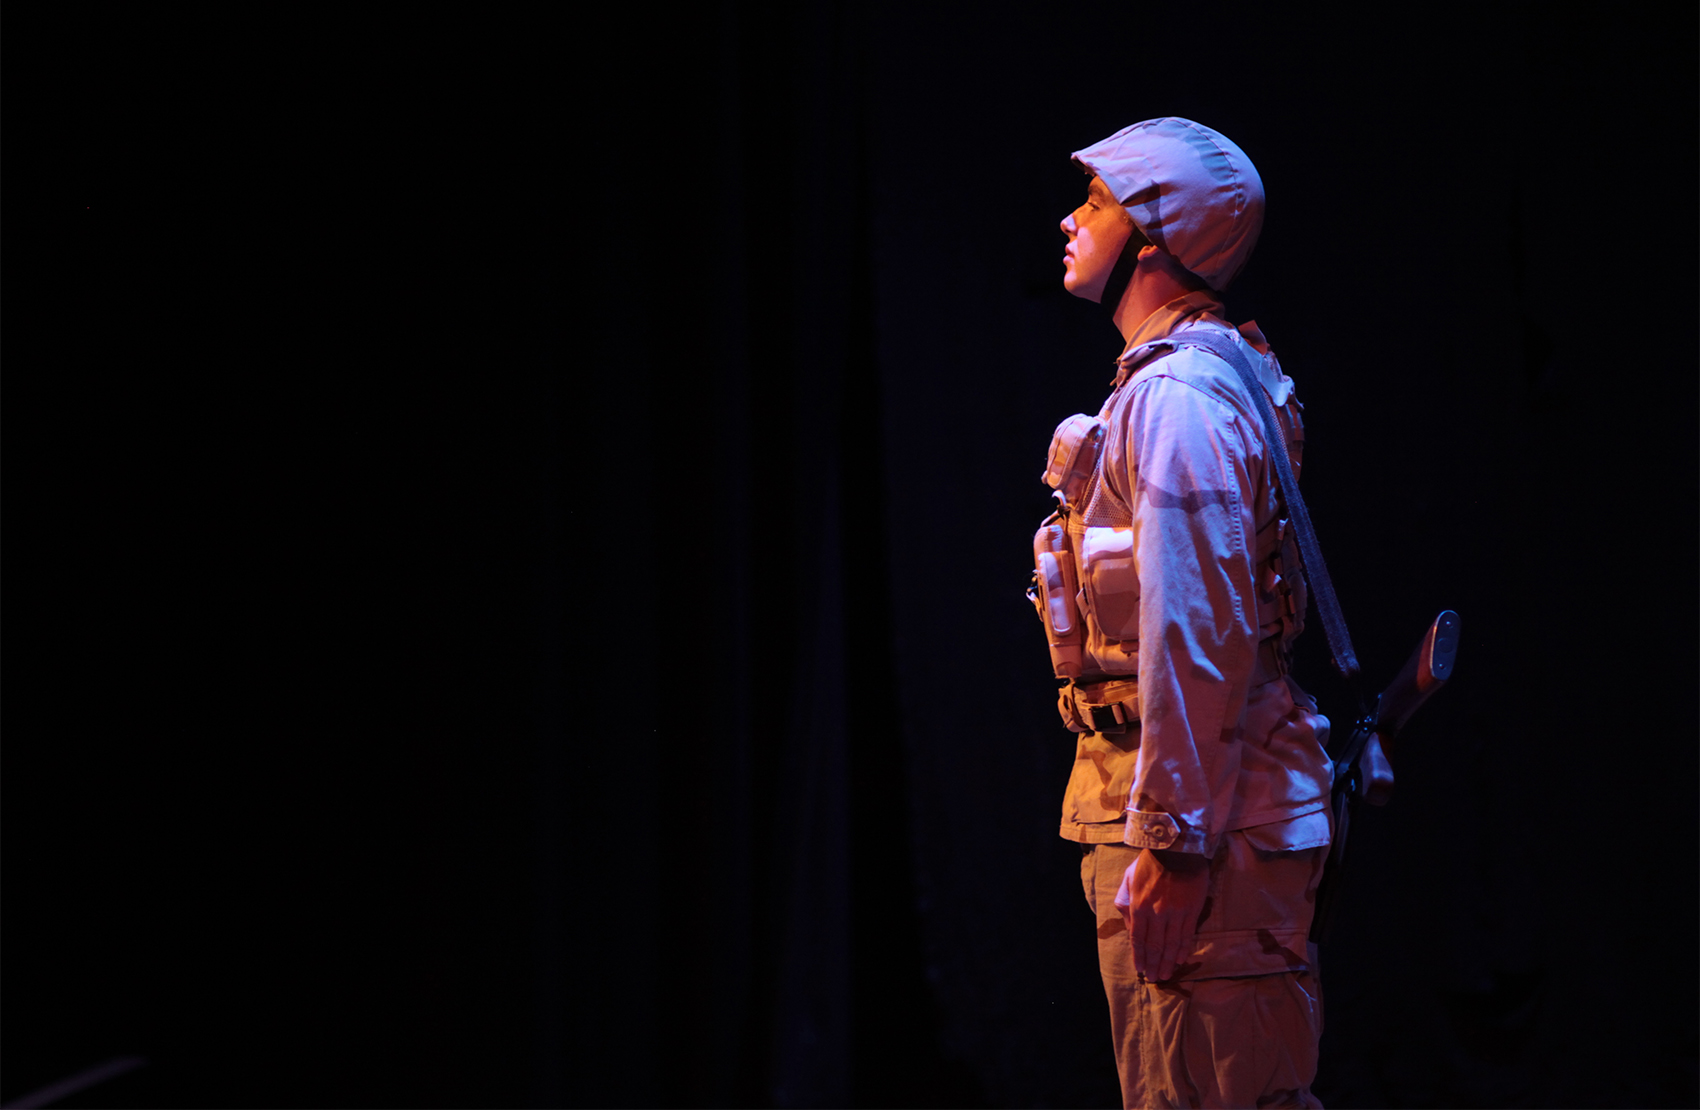 A young military solider stands in his helmet and accompanying gear, rifle against his back as he looks out and in silence or reverie. The background is dark against his light figure.  